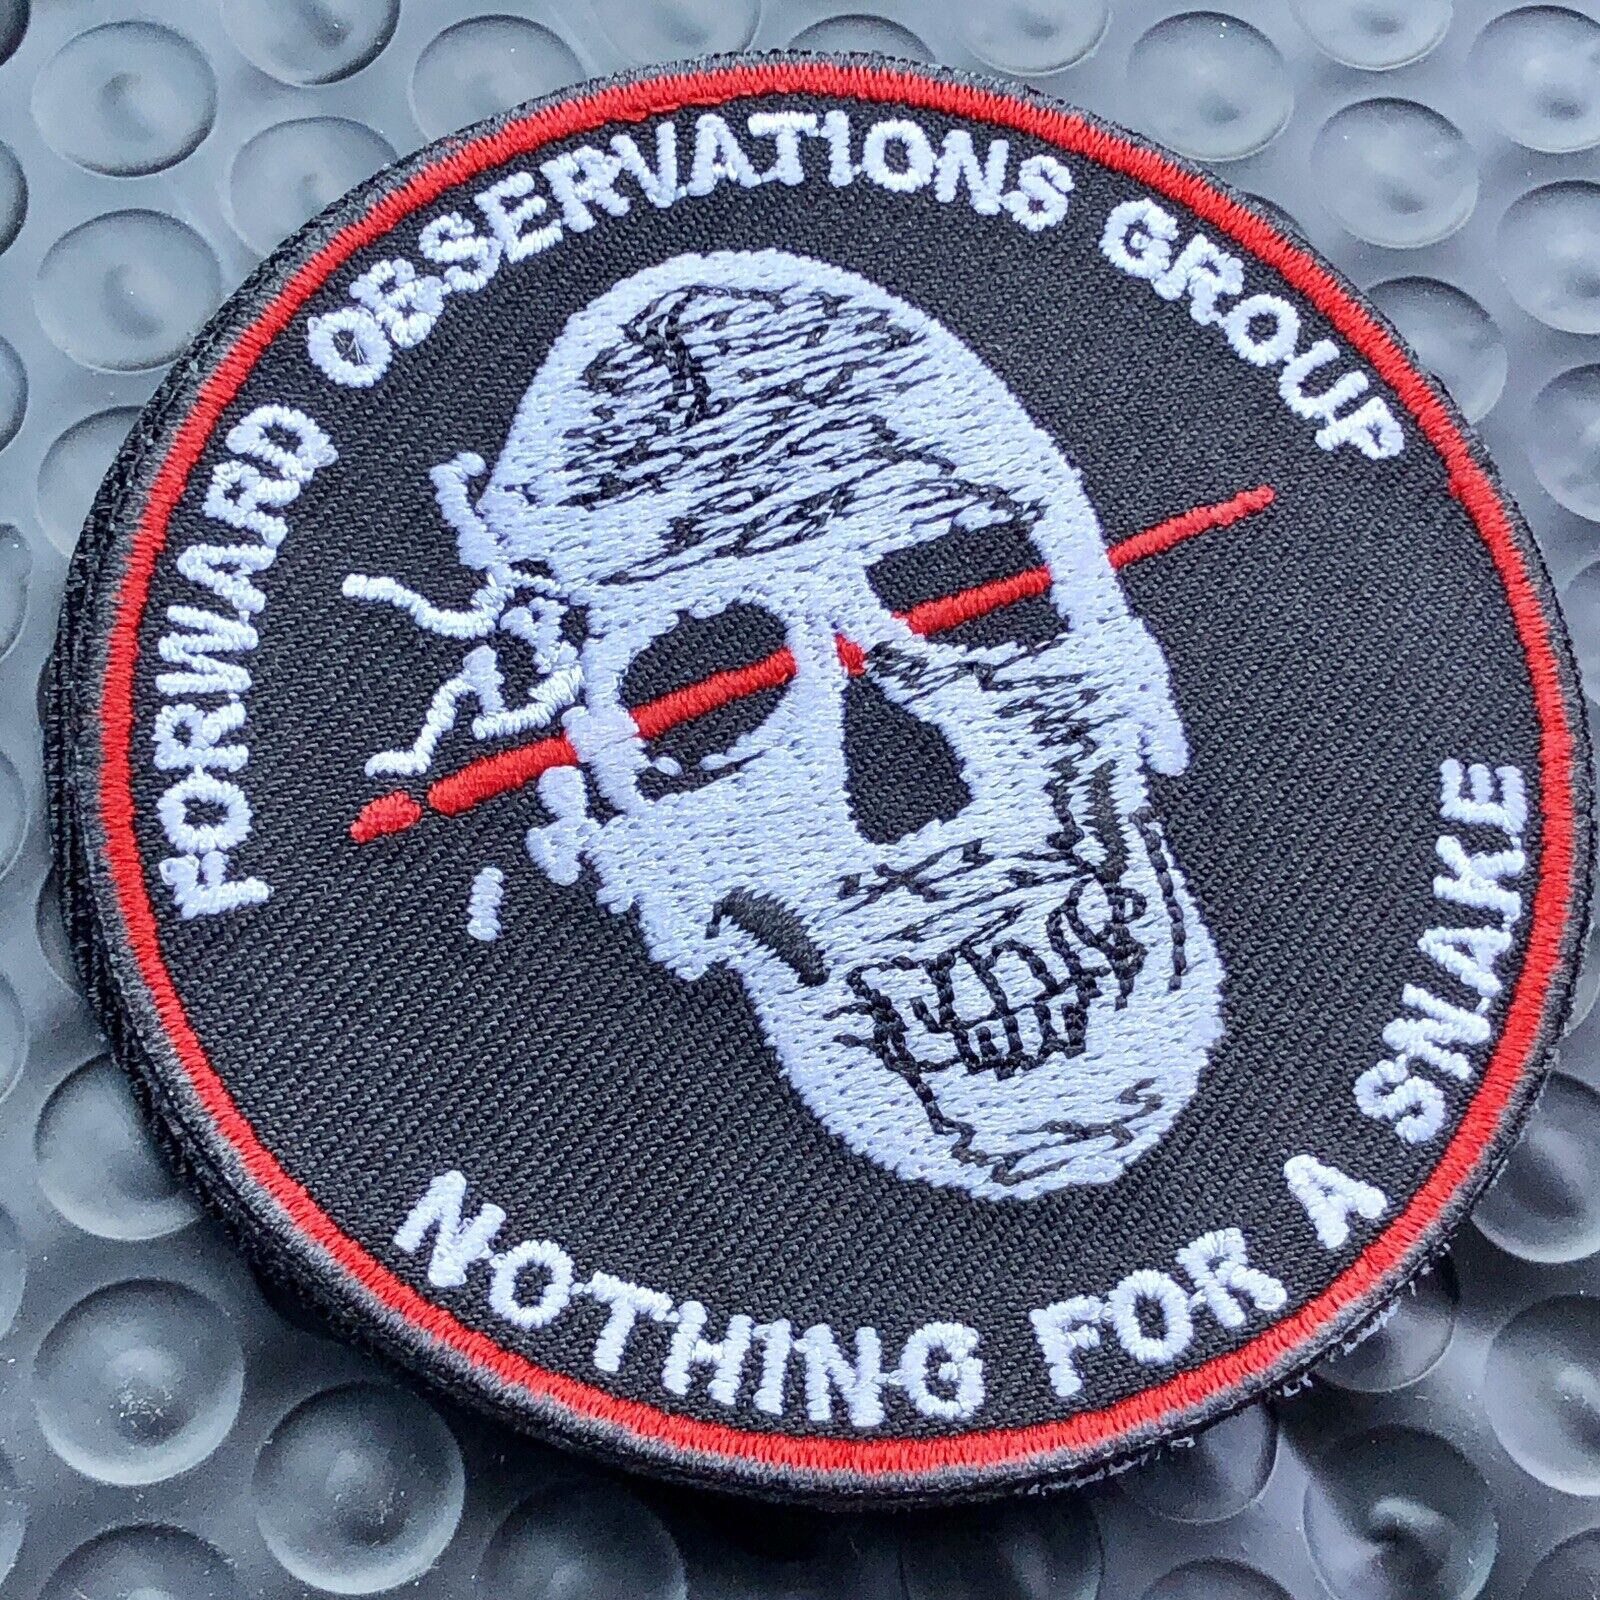 Forward Observations Group Nothing For A Snake Patch Superior Defense GBRS Ferro